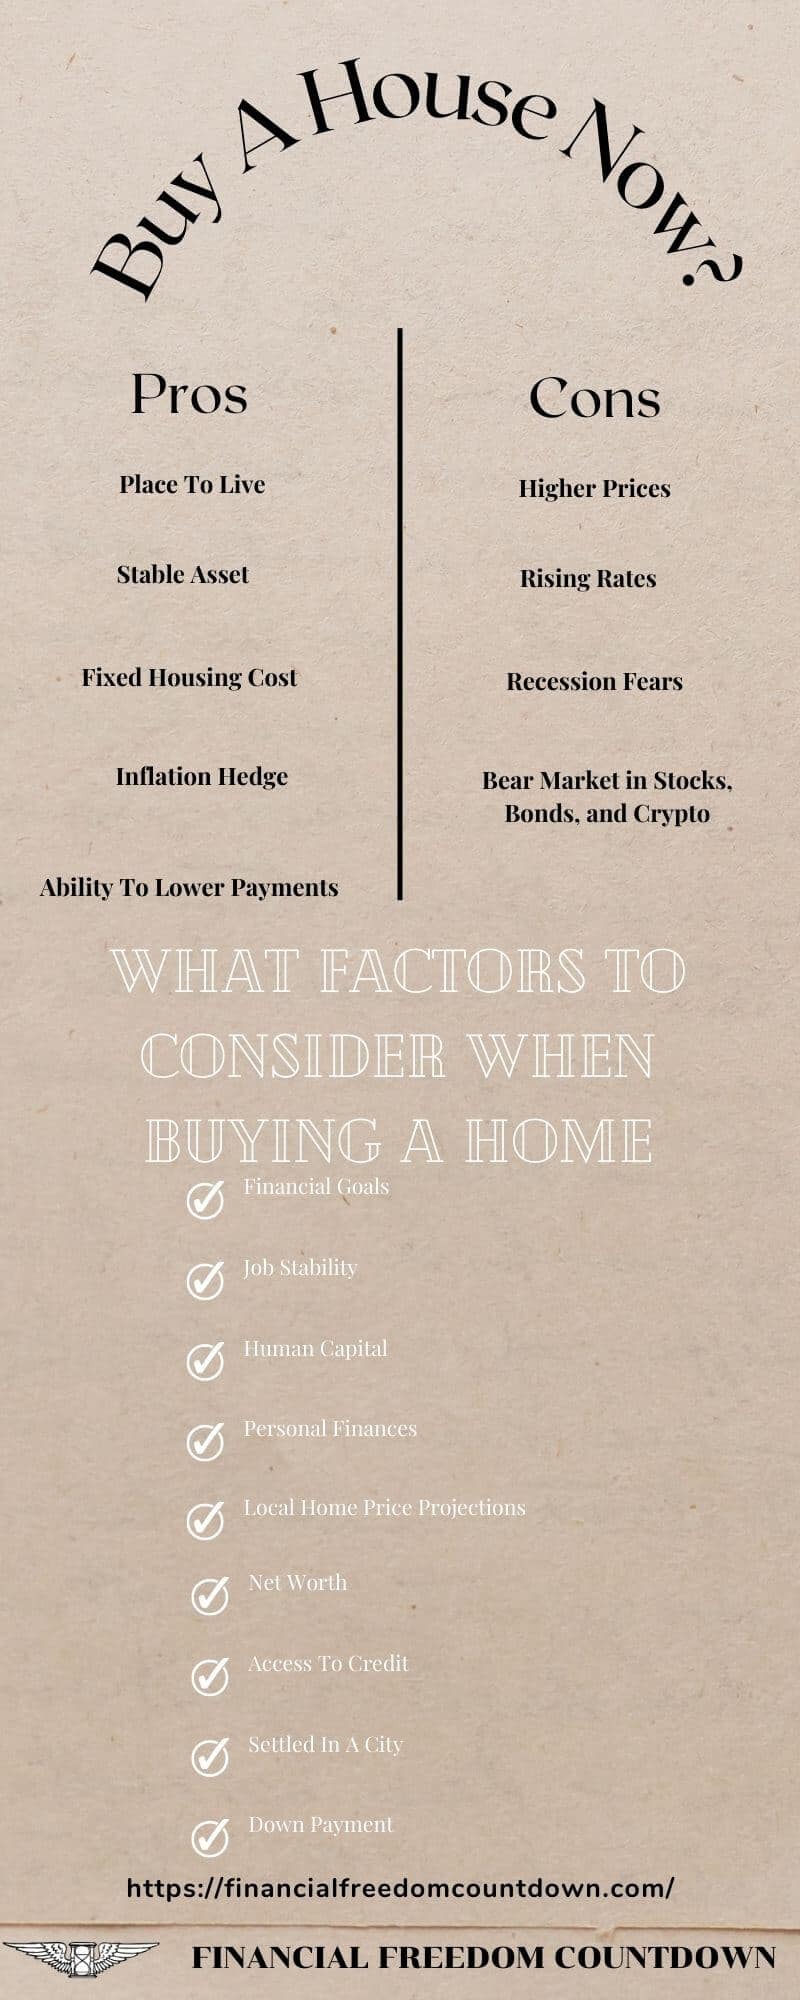 Is Now A Good Time To Buy A House - Pros and Cons